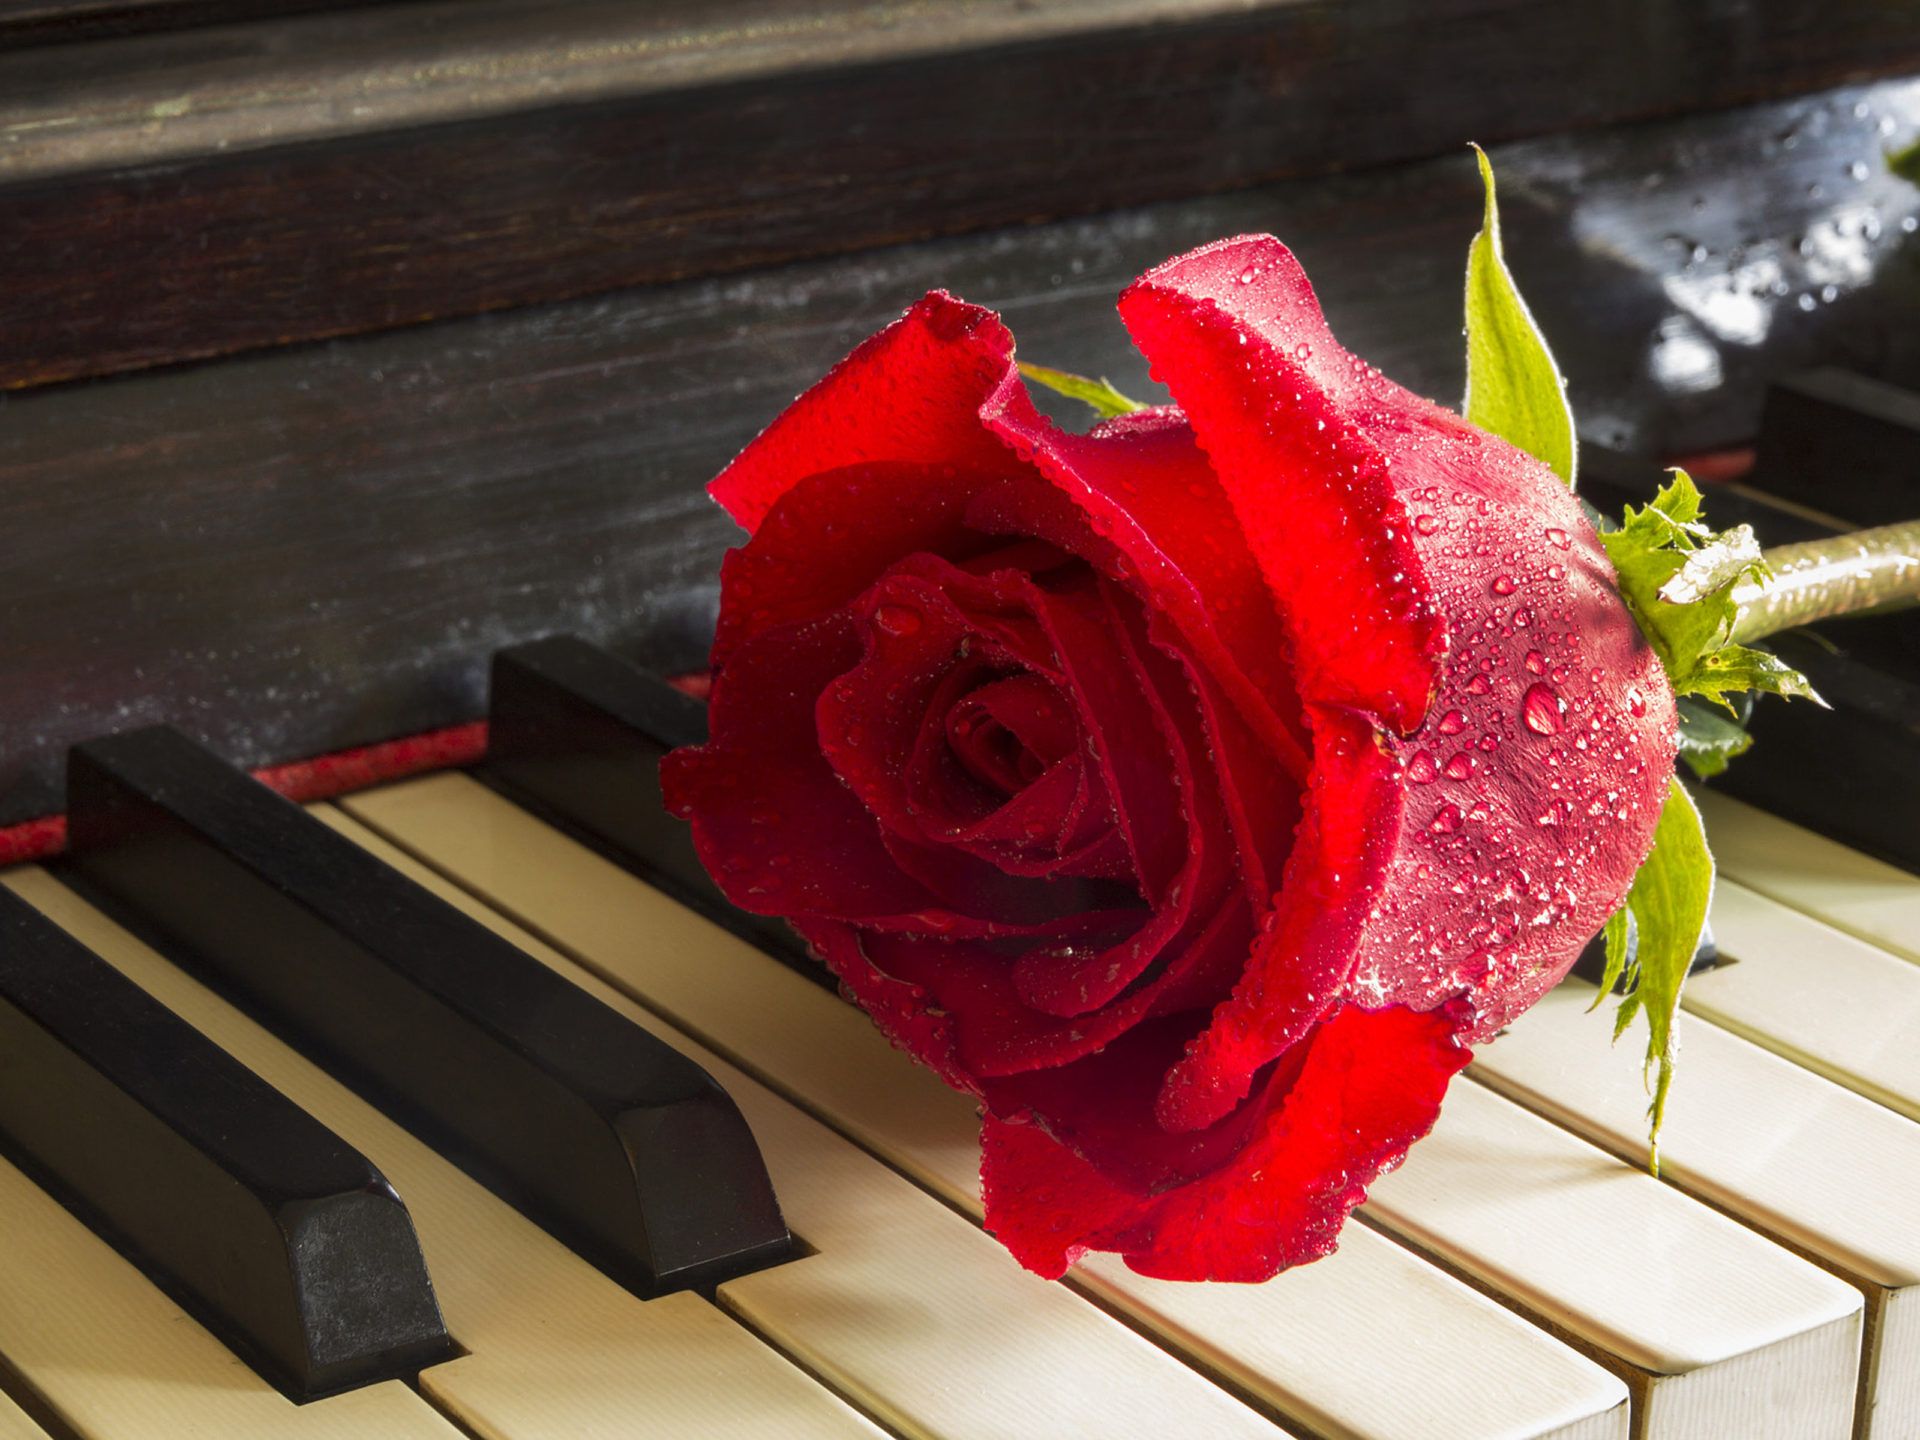 Red Rose On Piano Relaxing Music Meditation Desktop HD Wallpaper For Mobile Phones And Computer 3840x2400, Wallpaper13.com